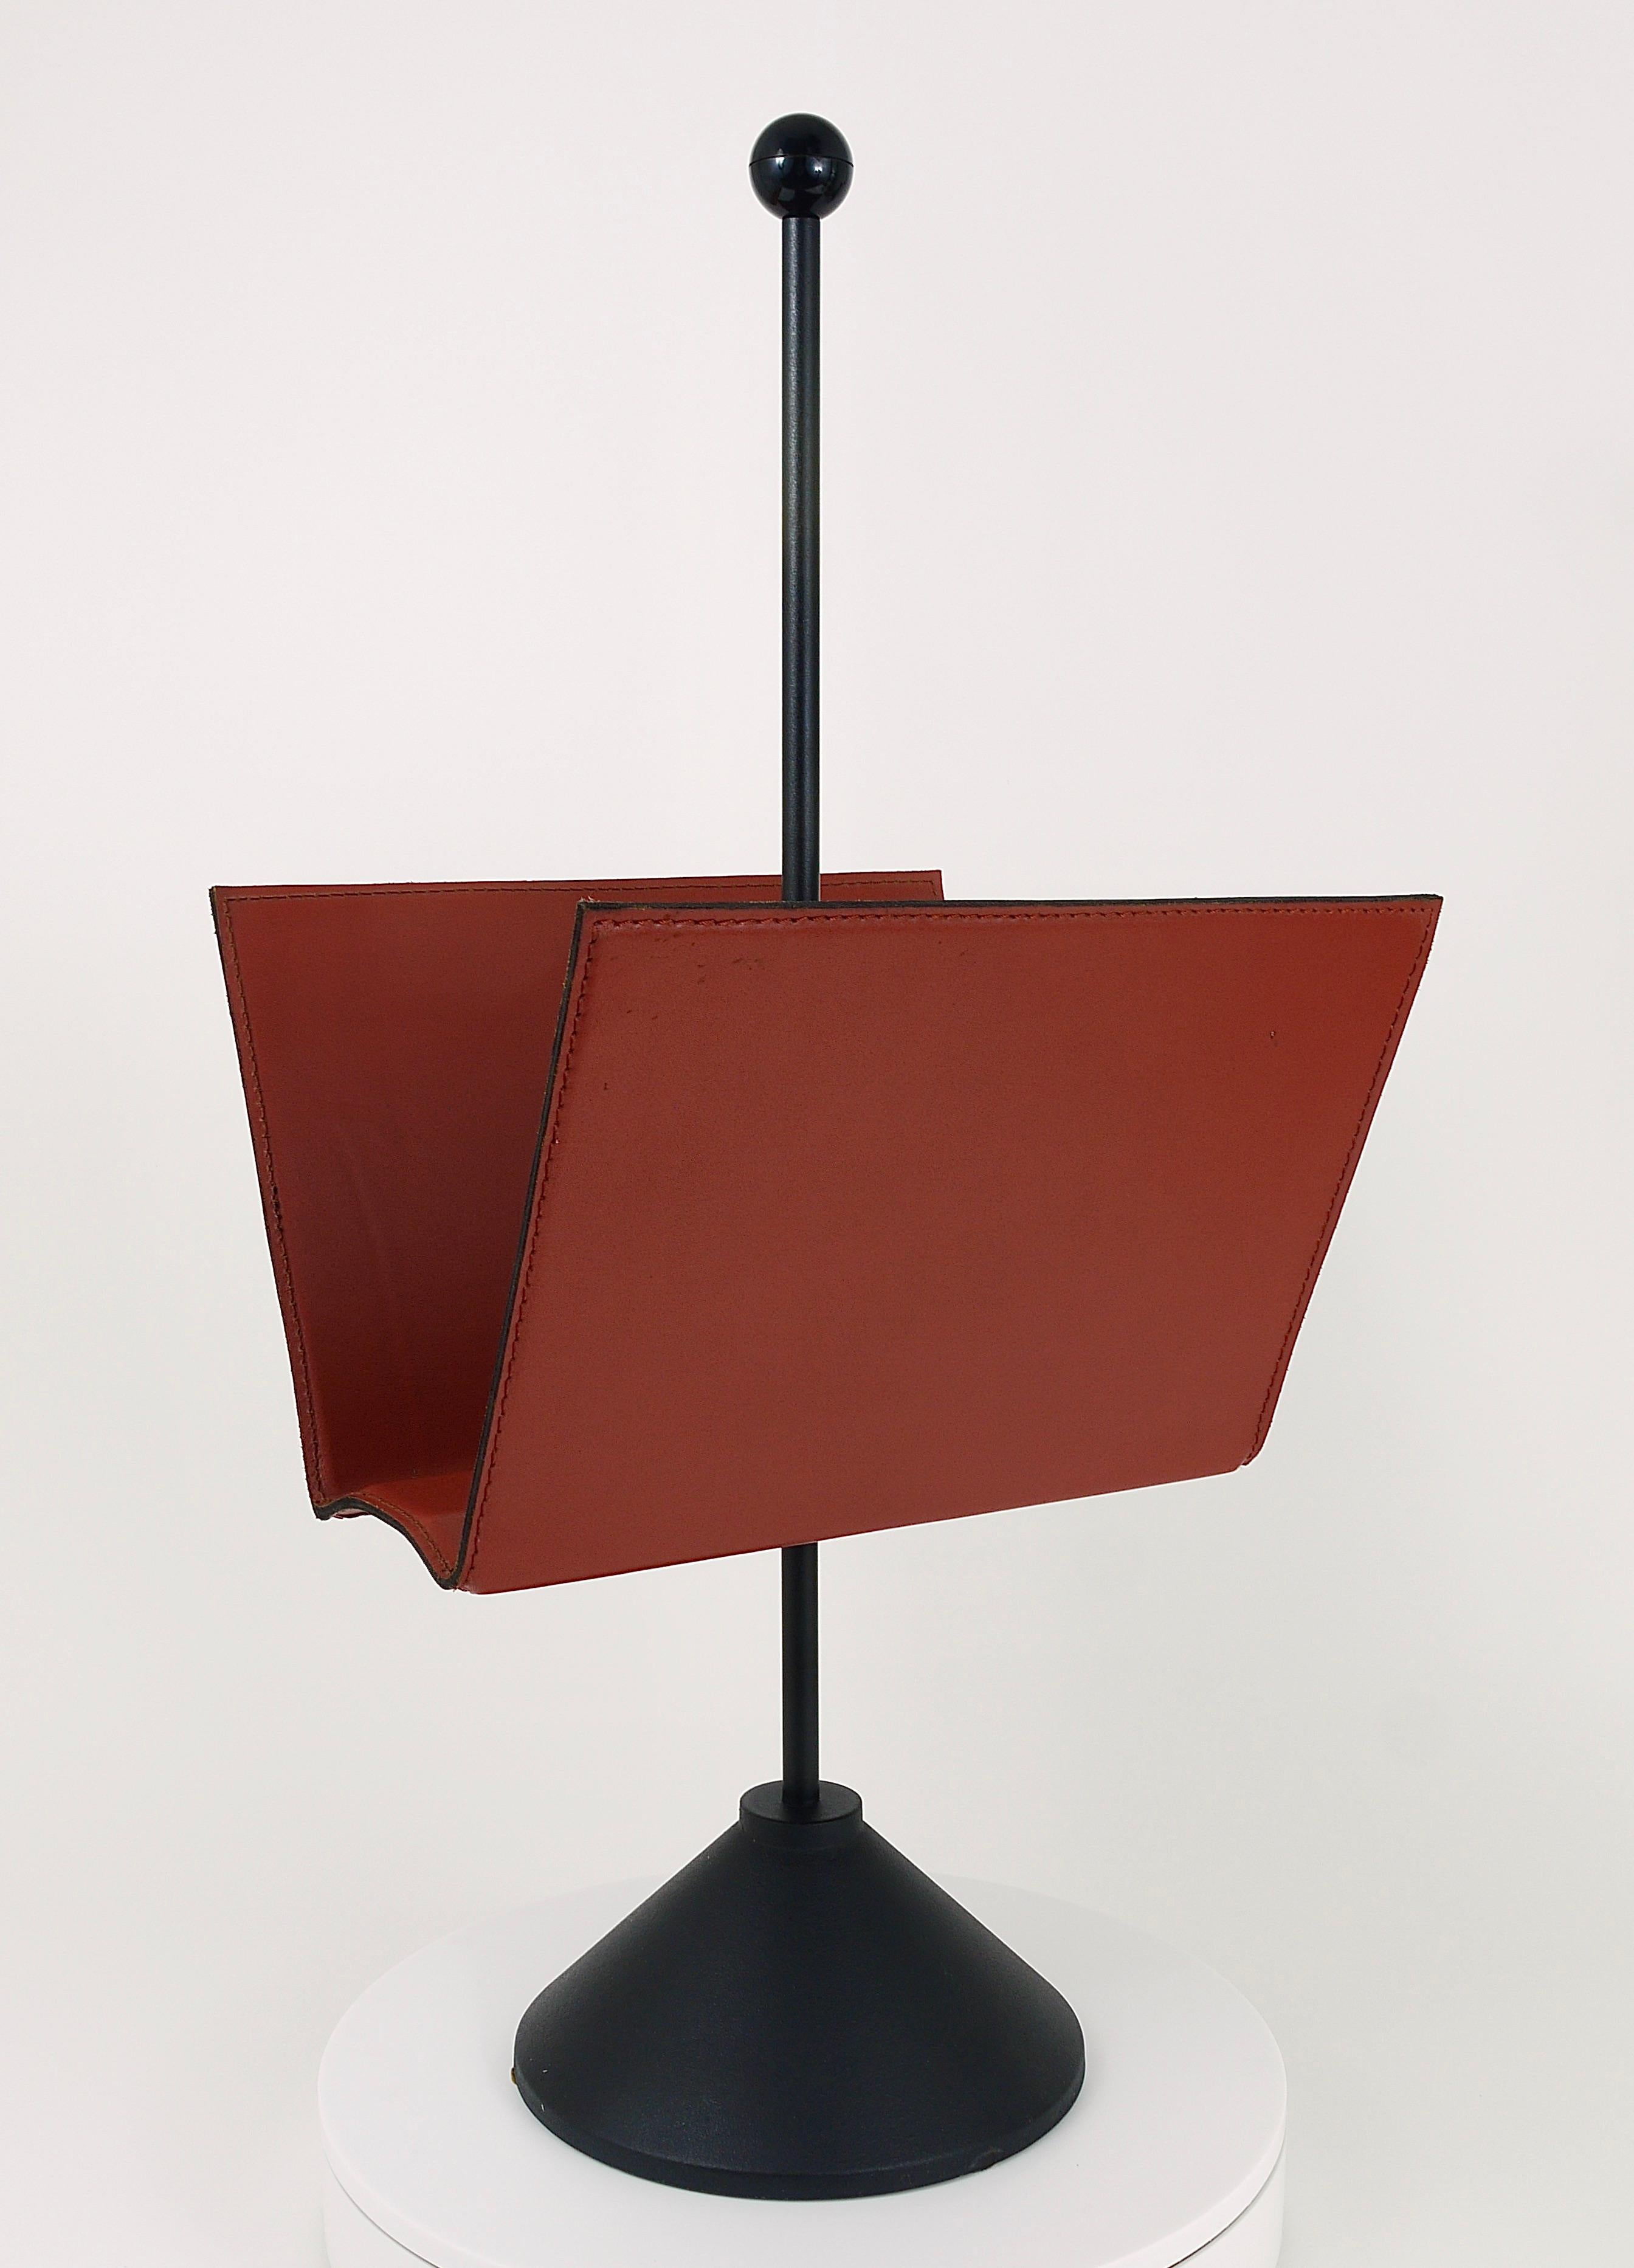 Porada Arredi Black Post Modern Leather Magazine Rack News Stand, Italy, 1980s In Good Condition For Sale In Vienna, AT